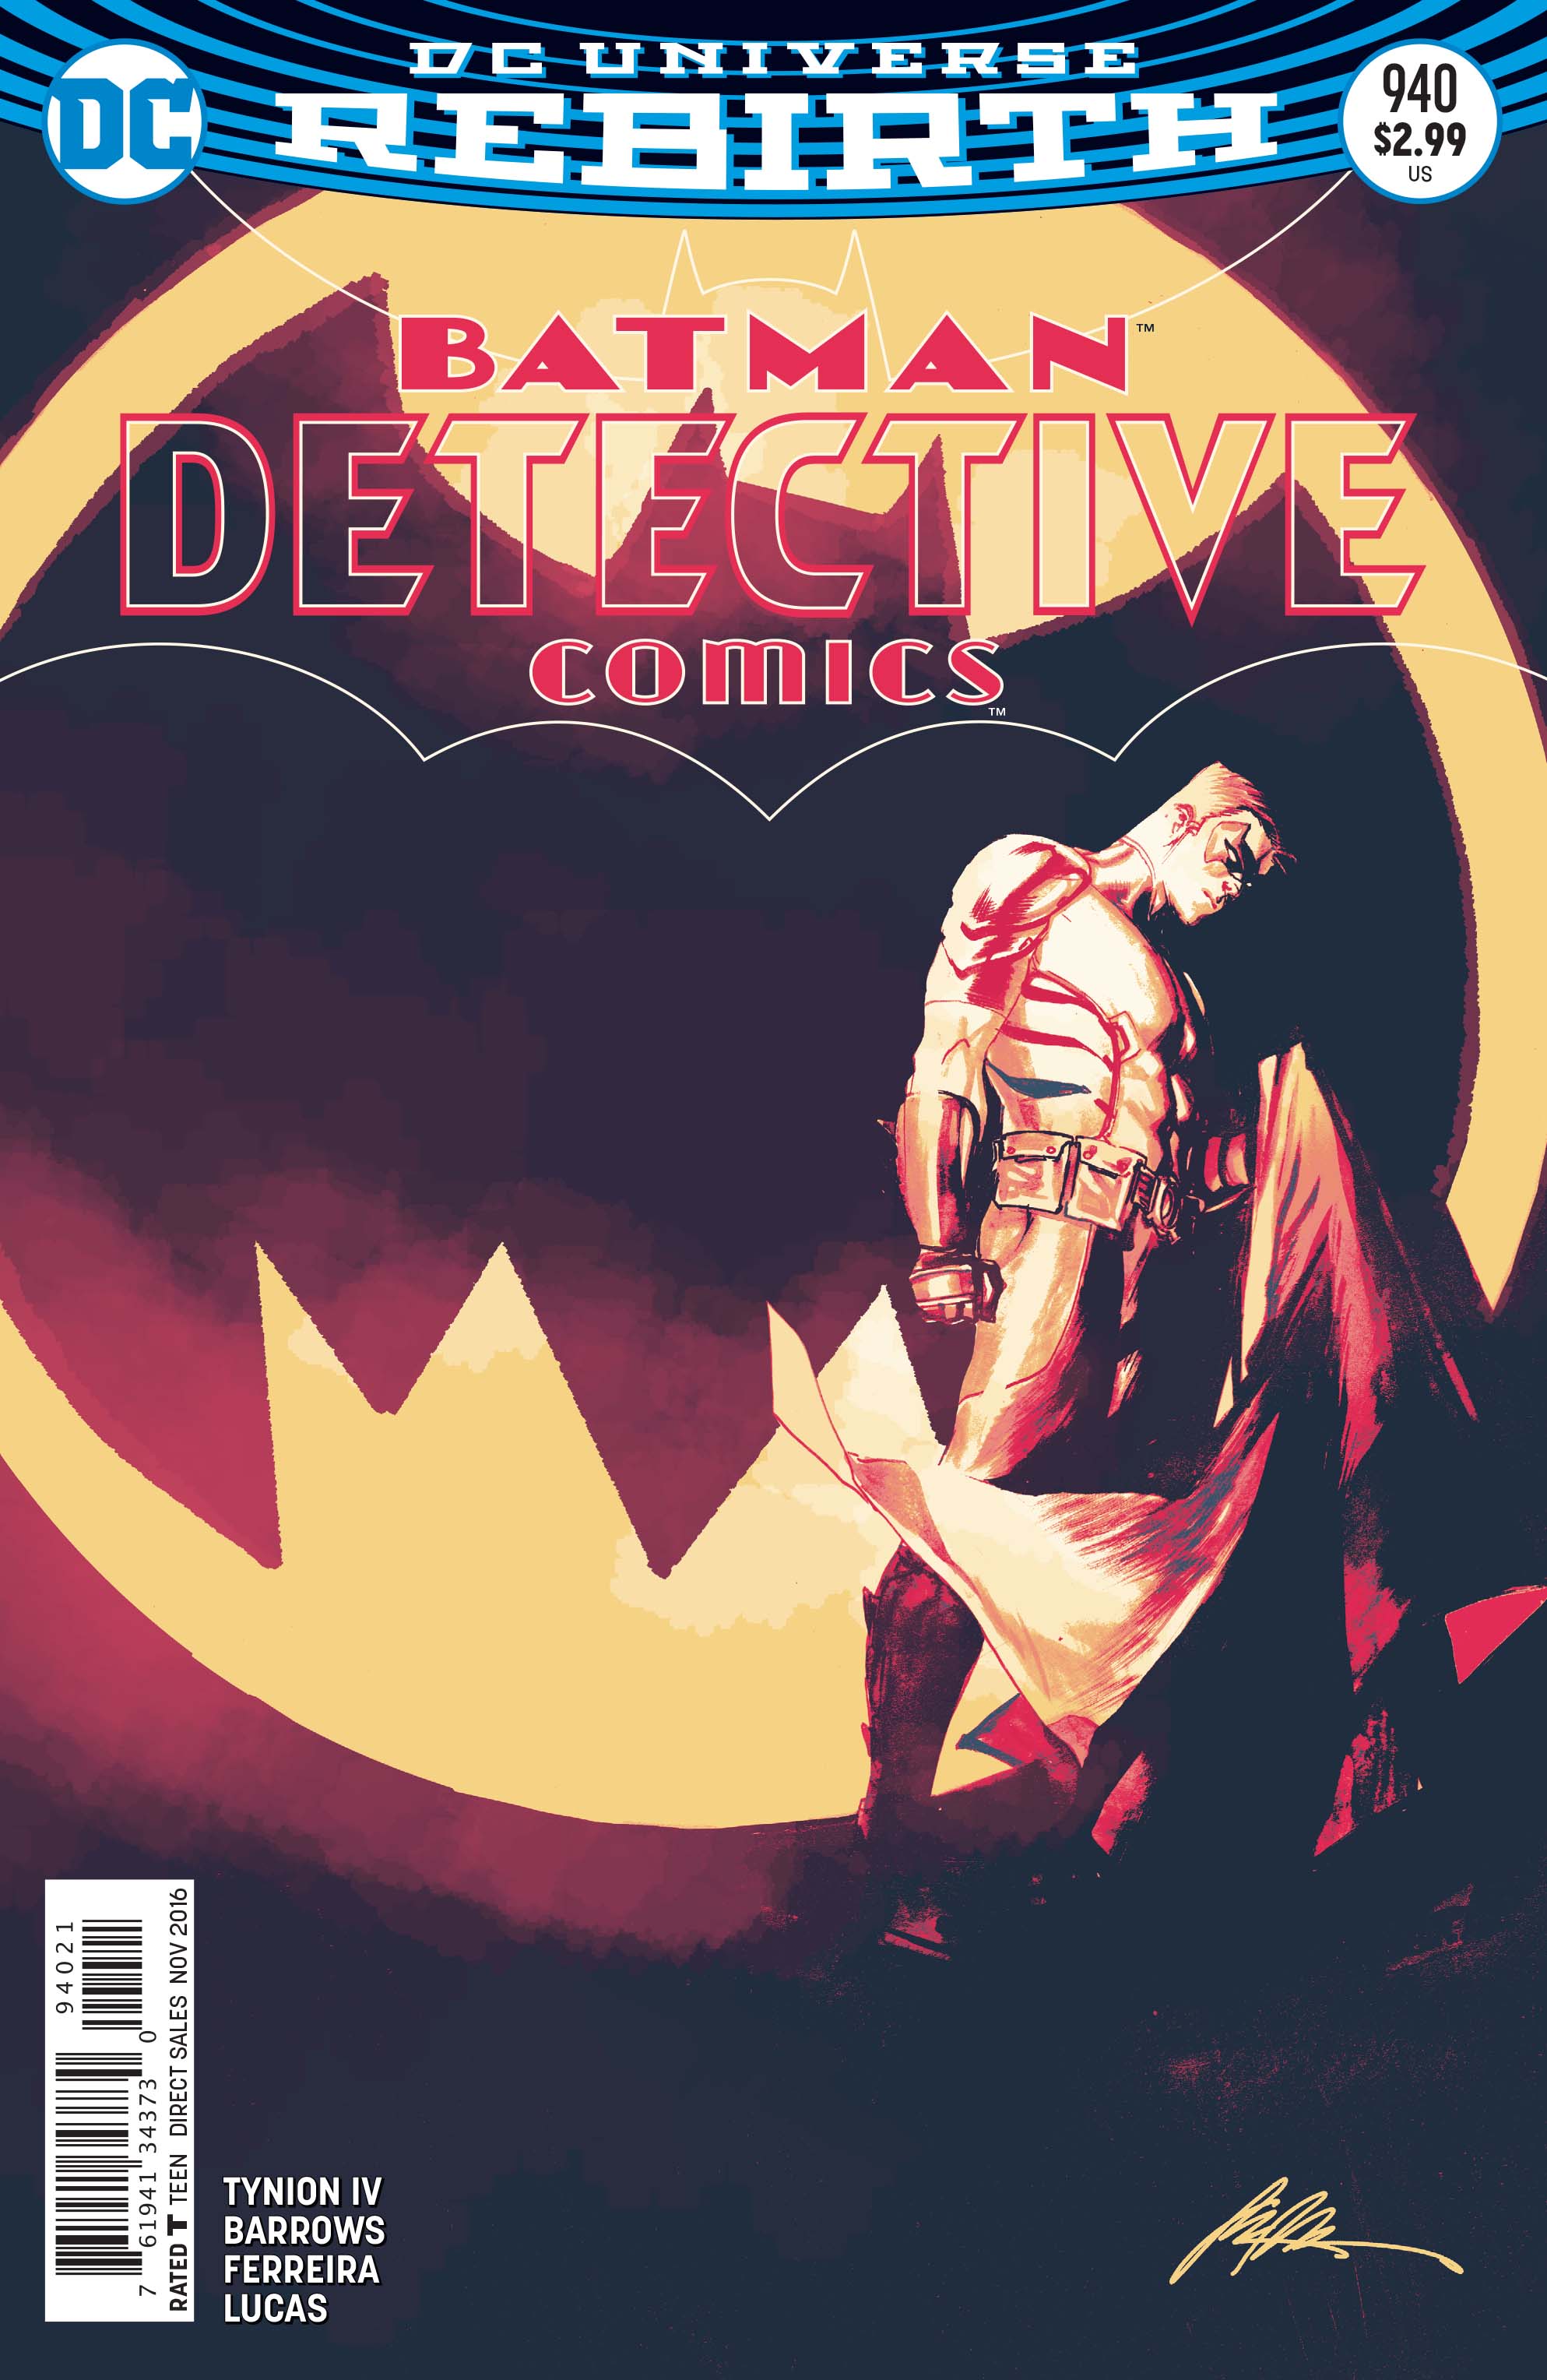 Images from Detective Comics #940